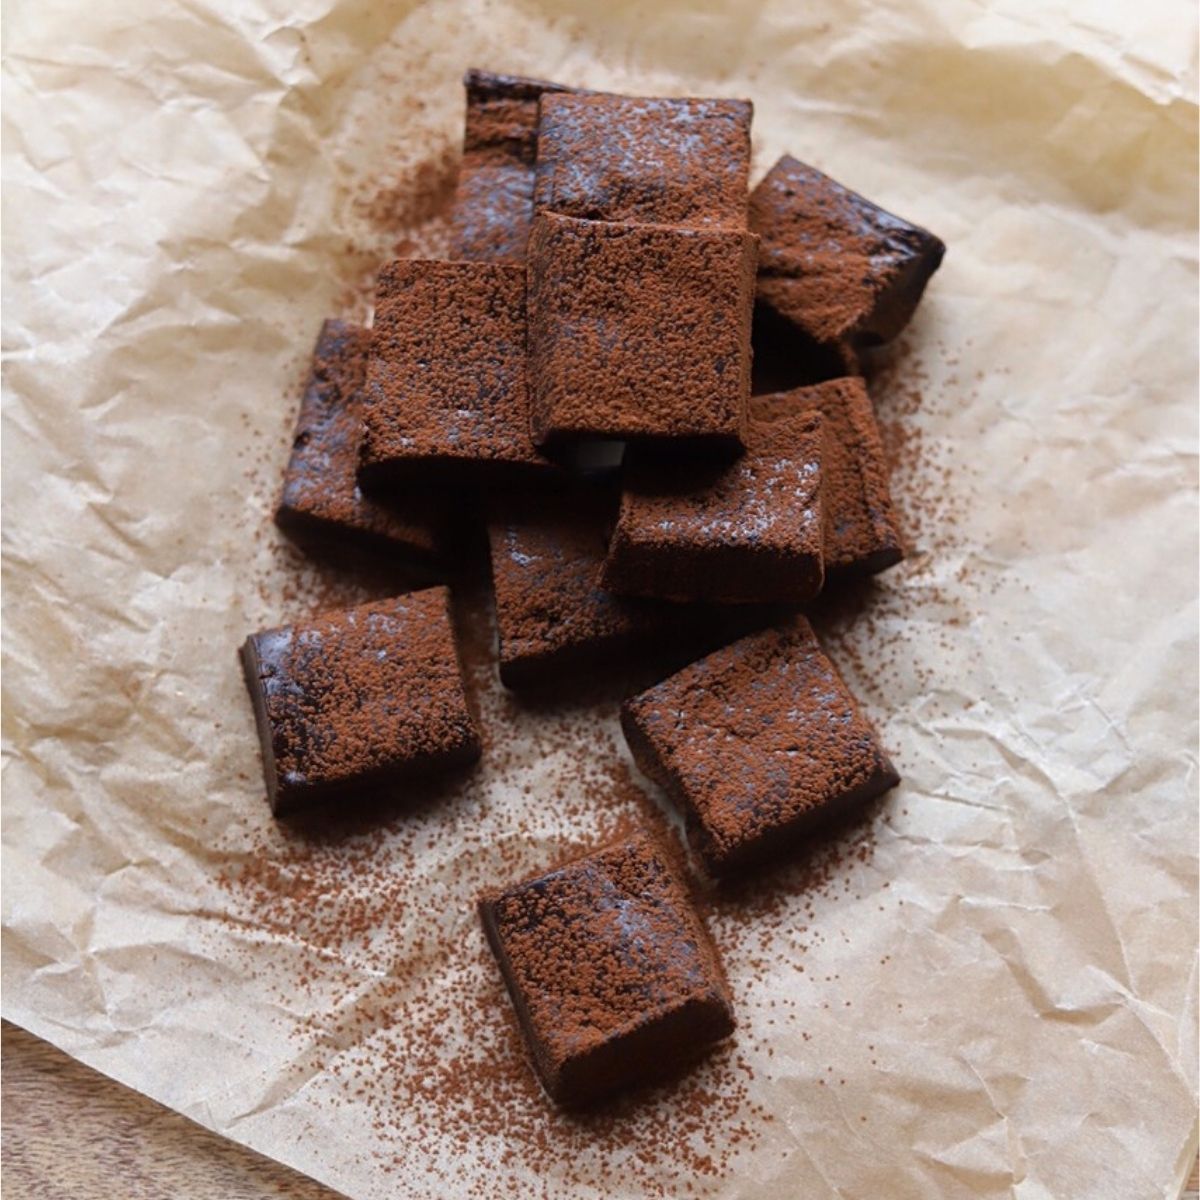 Image showing close up of squares of chocolate fudge.